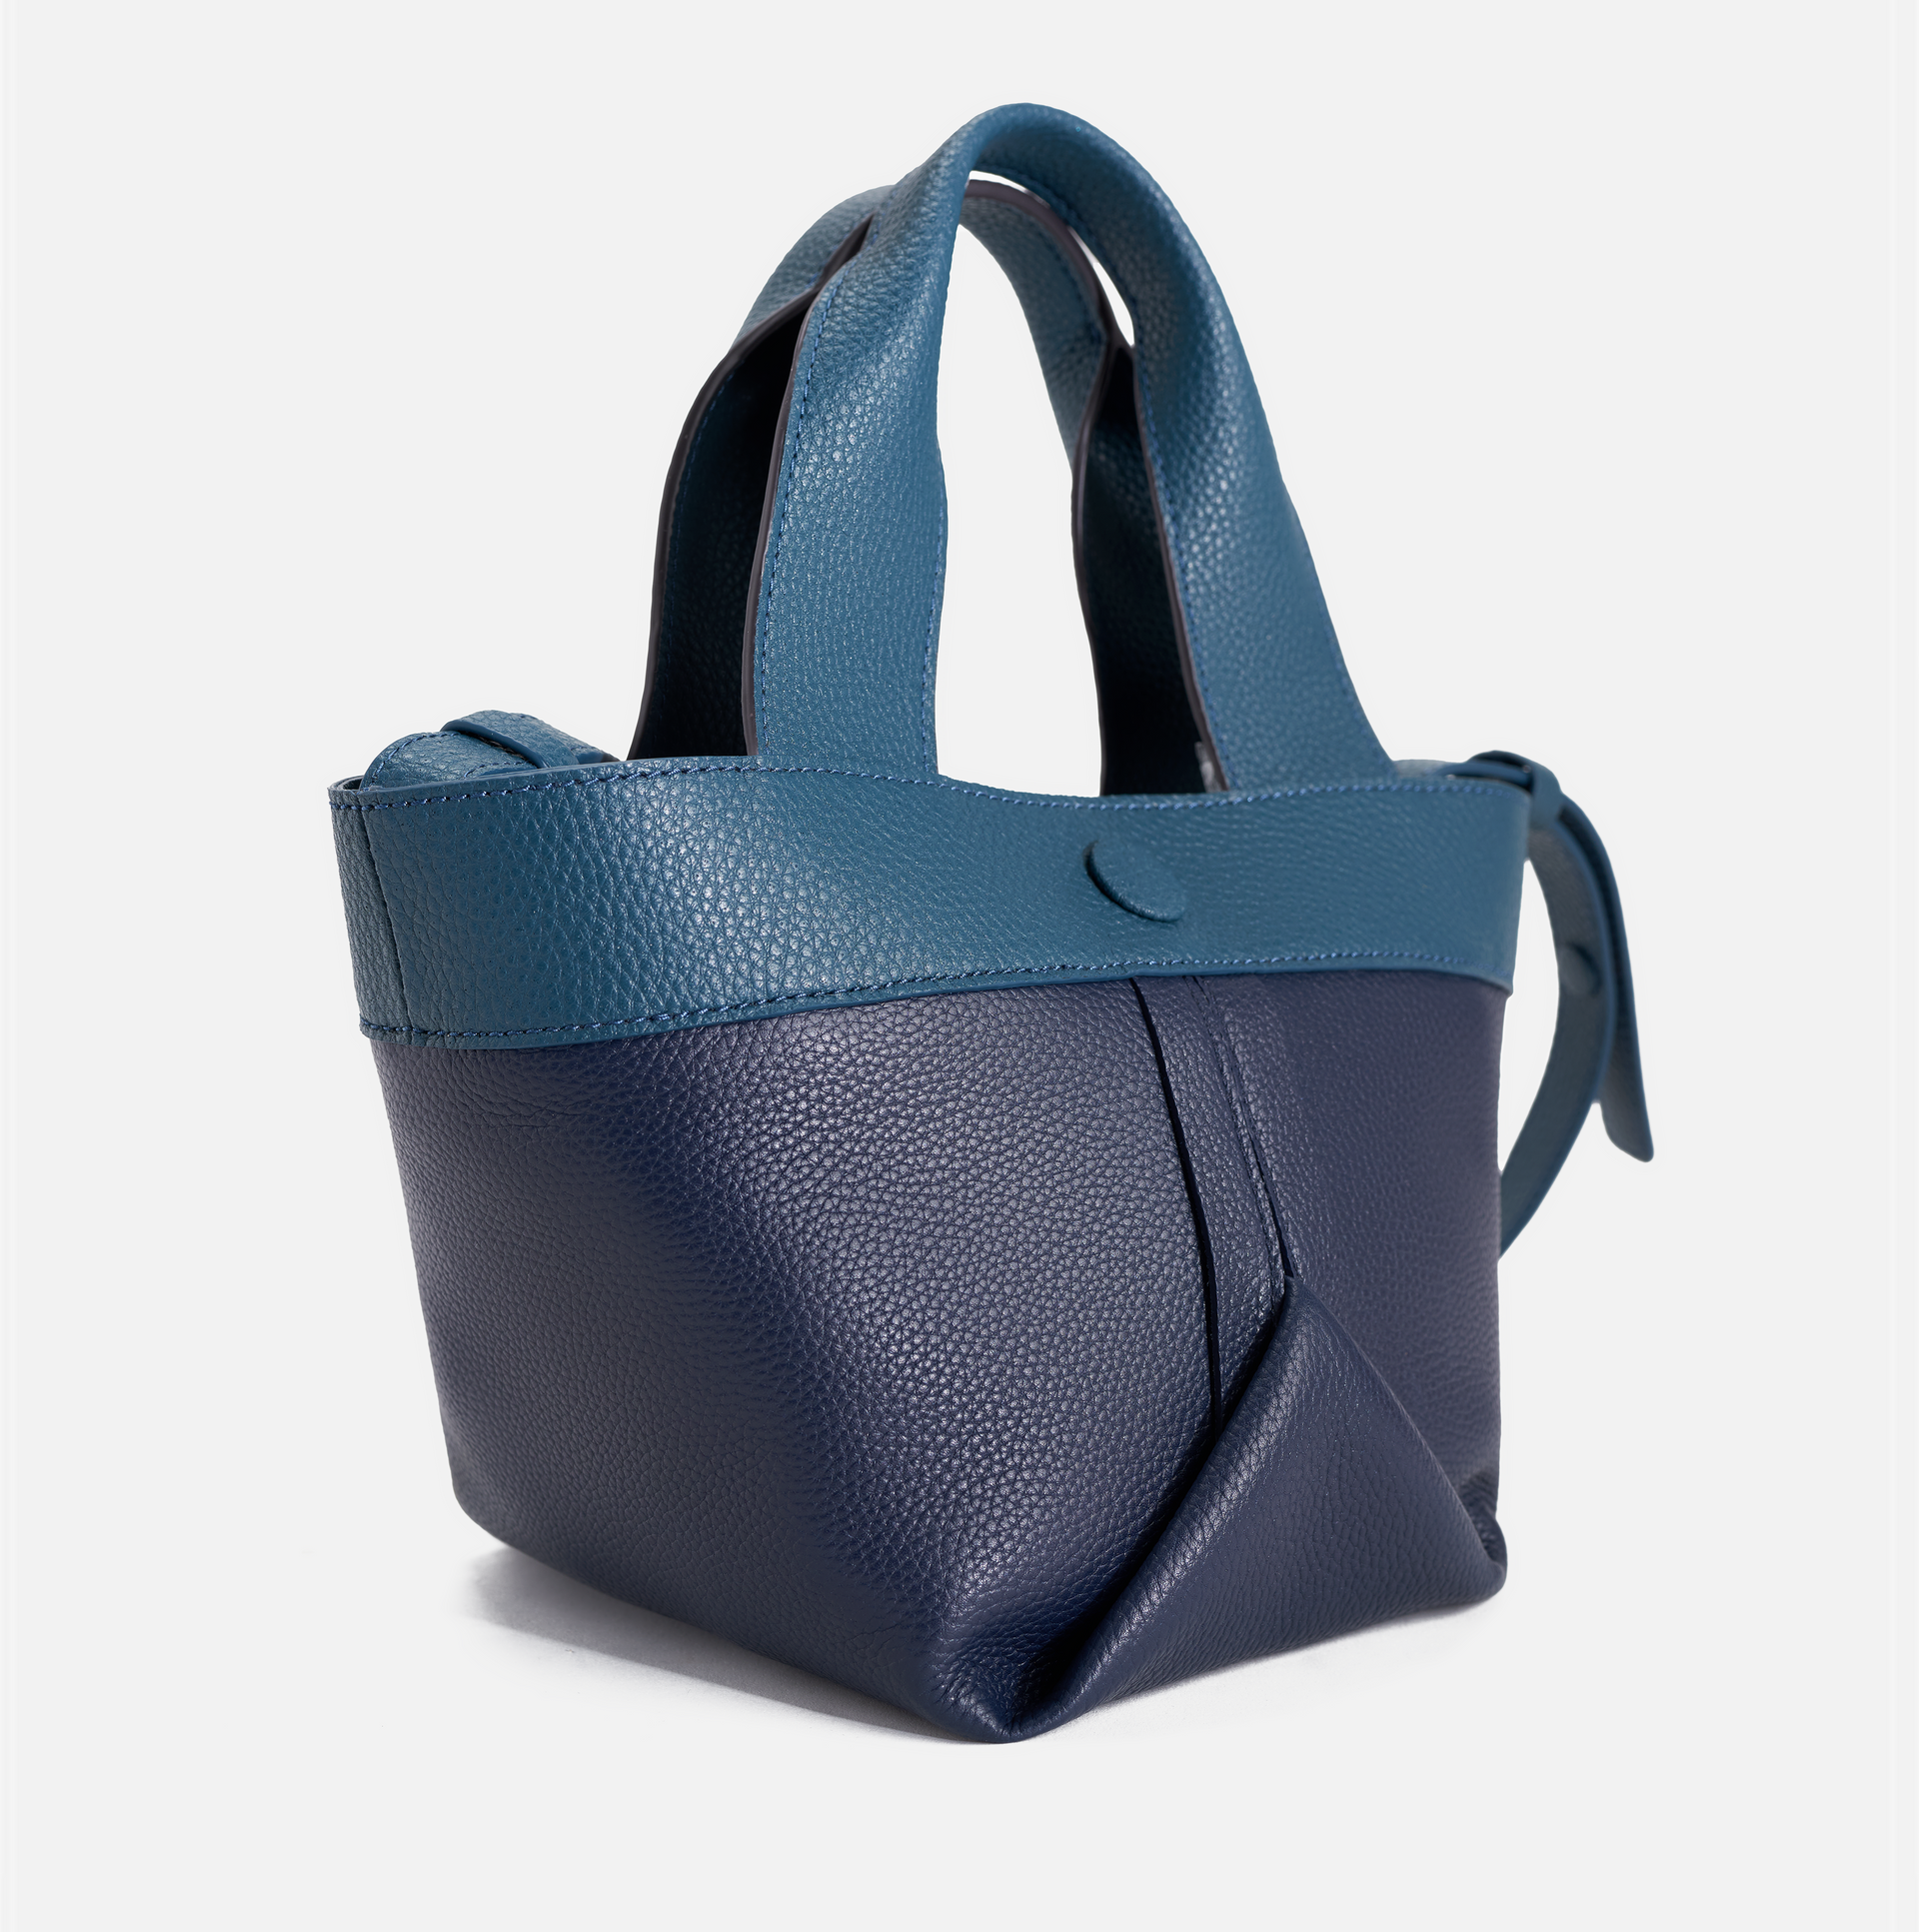 Gusset small pebble leather tote in emerald forest / blazer blue